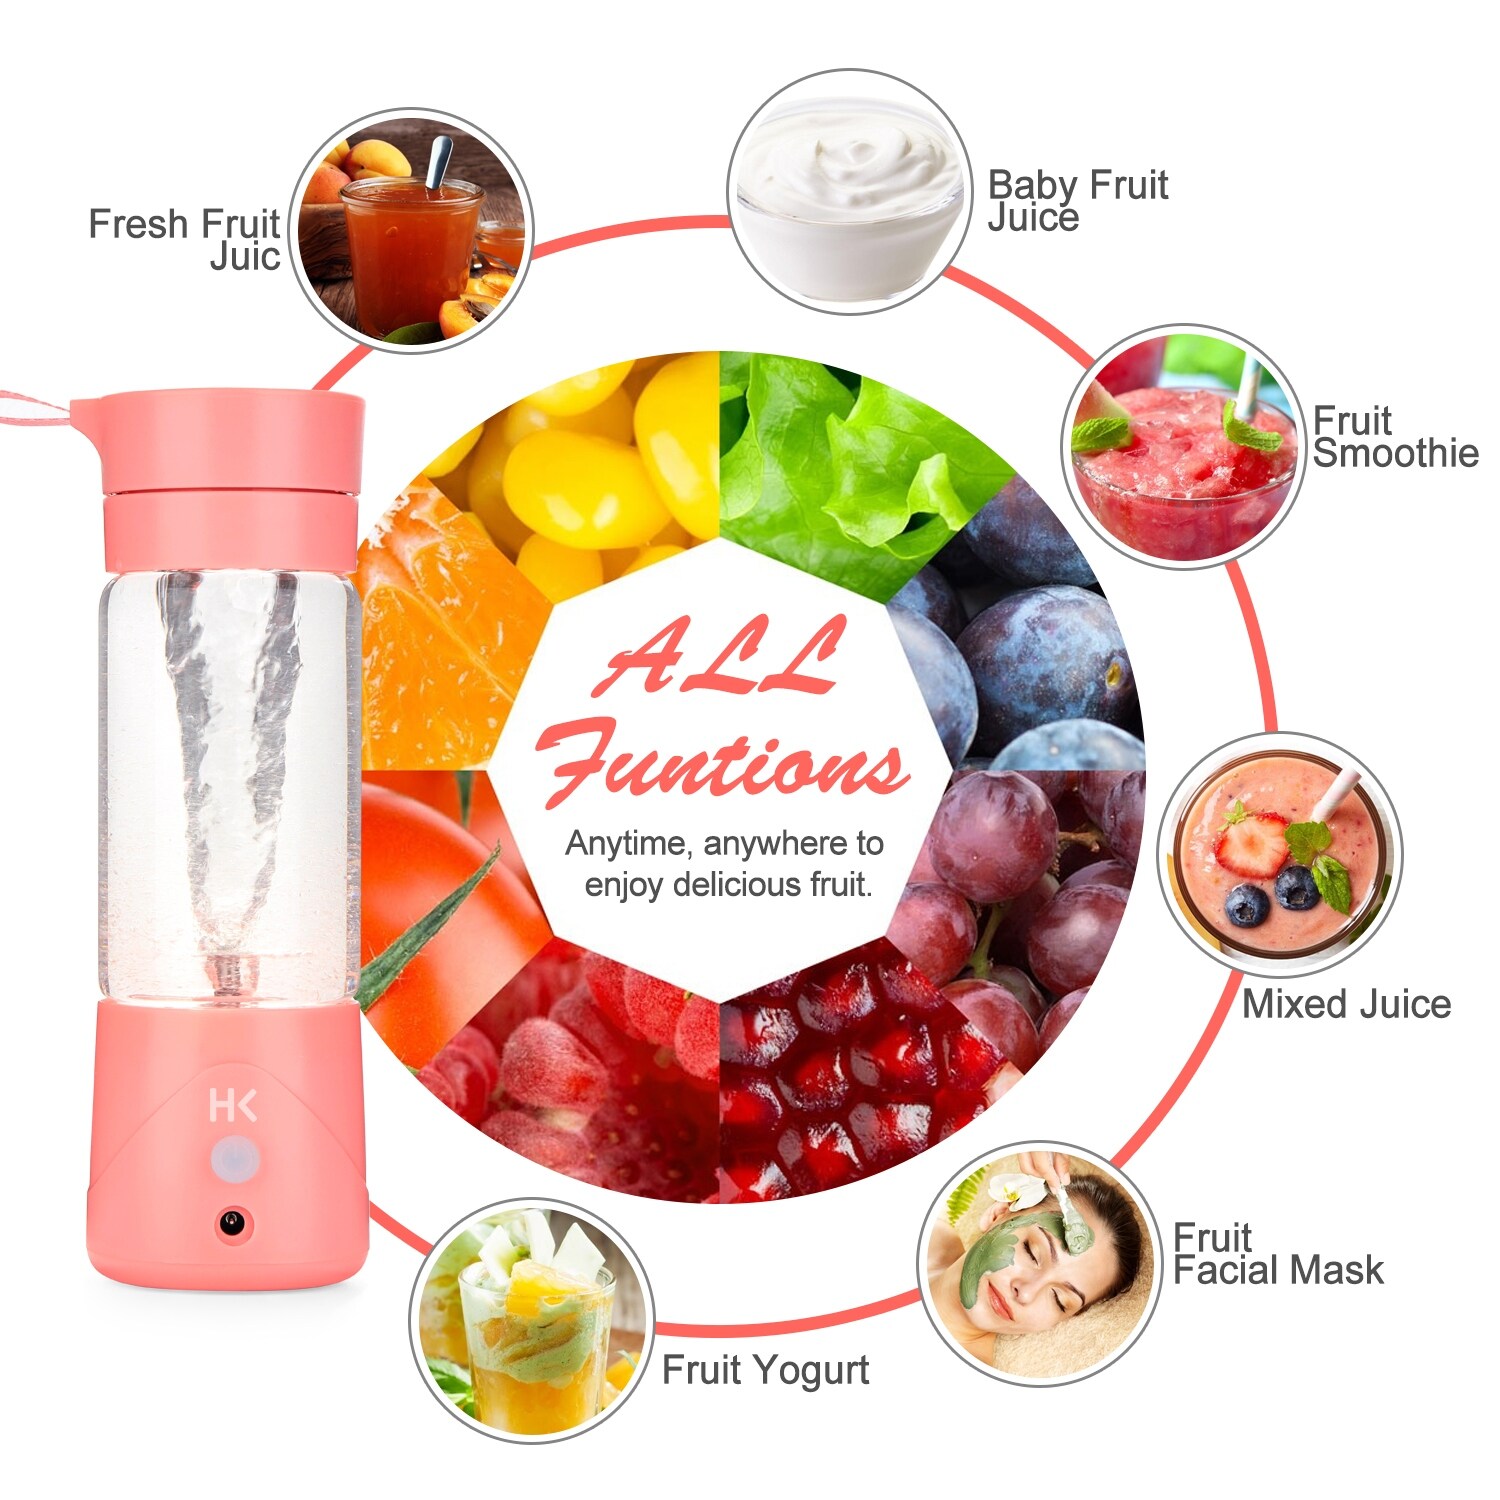 https://ak1.ostkcdn.com/images/products/is/images/direct/5afab1266350a7e94e70a0e8f5615424b1d26cd1/US-Portable-Rechargeable-Jet-Squeezers-Juicer-Mixer-Blend-Personal-Blender-Cup.jpg